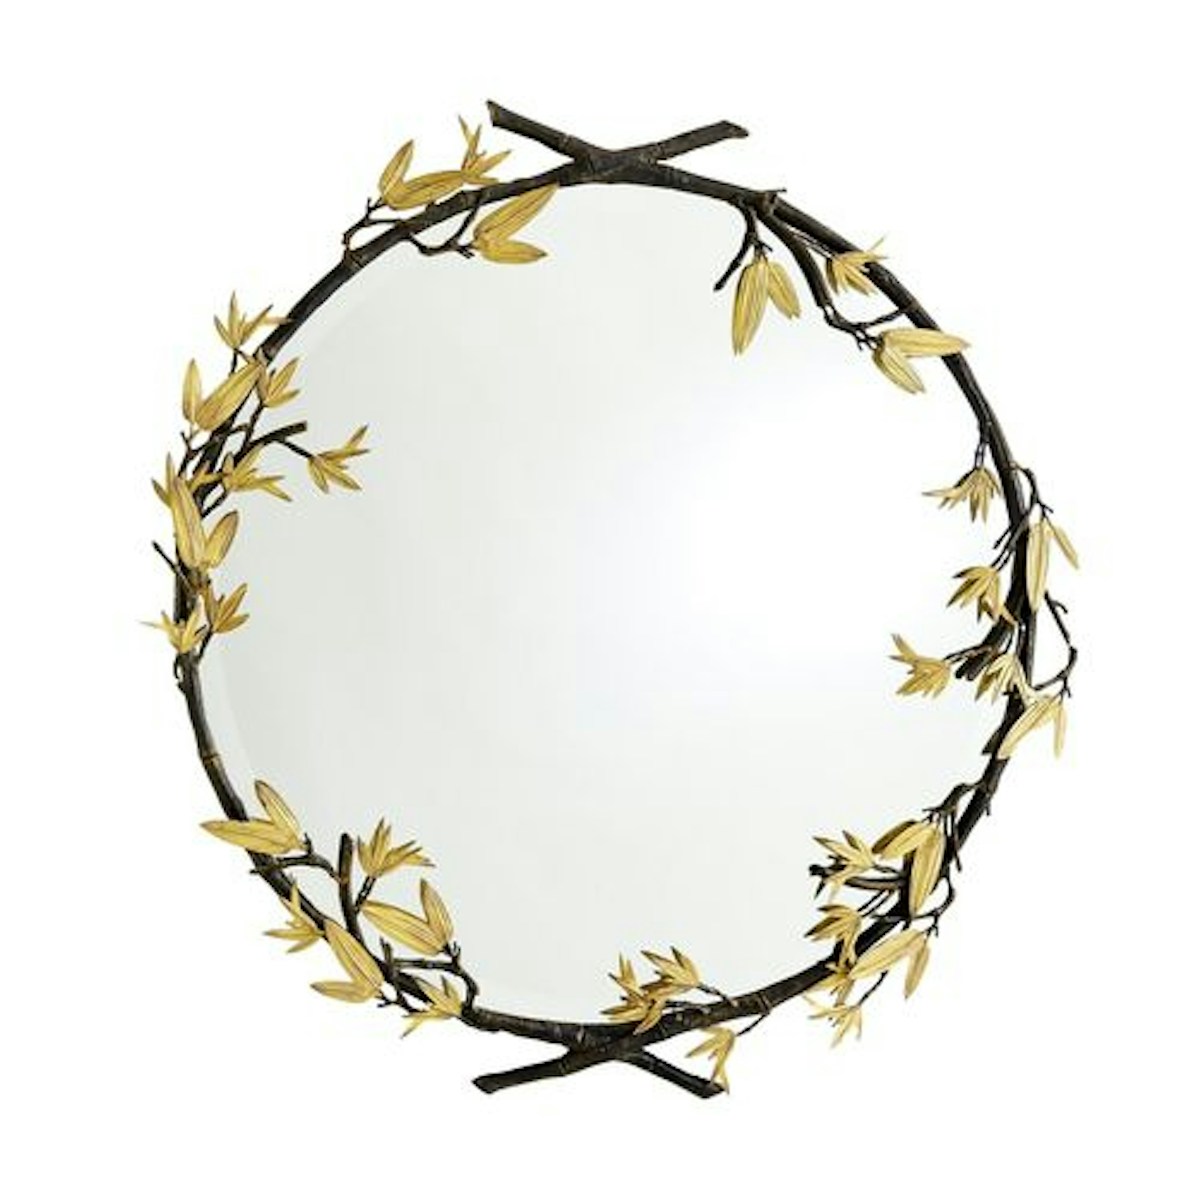 Bronze Bamboo Mirror - 9 Best Statement Wall Mirrors To Hang In Your Home - LuxDeco.com